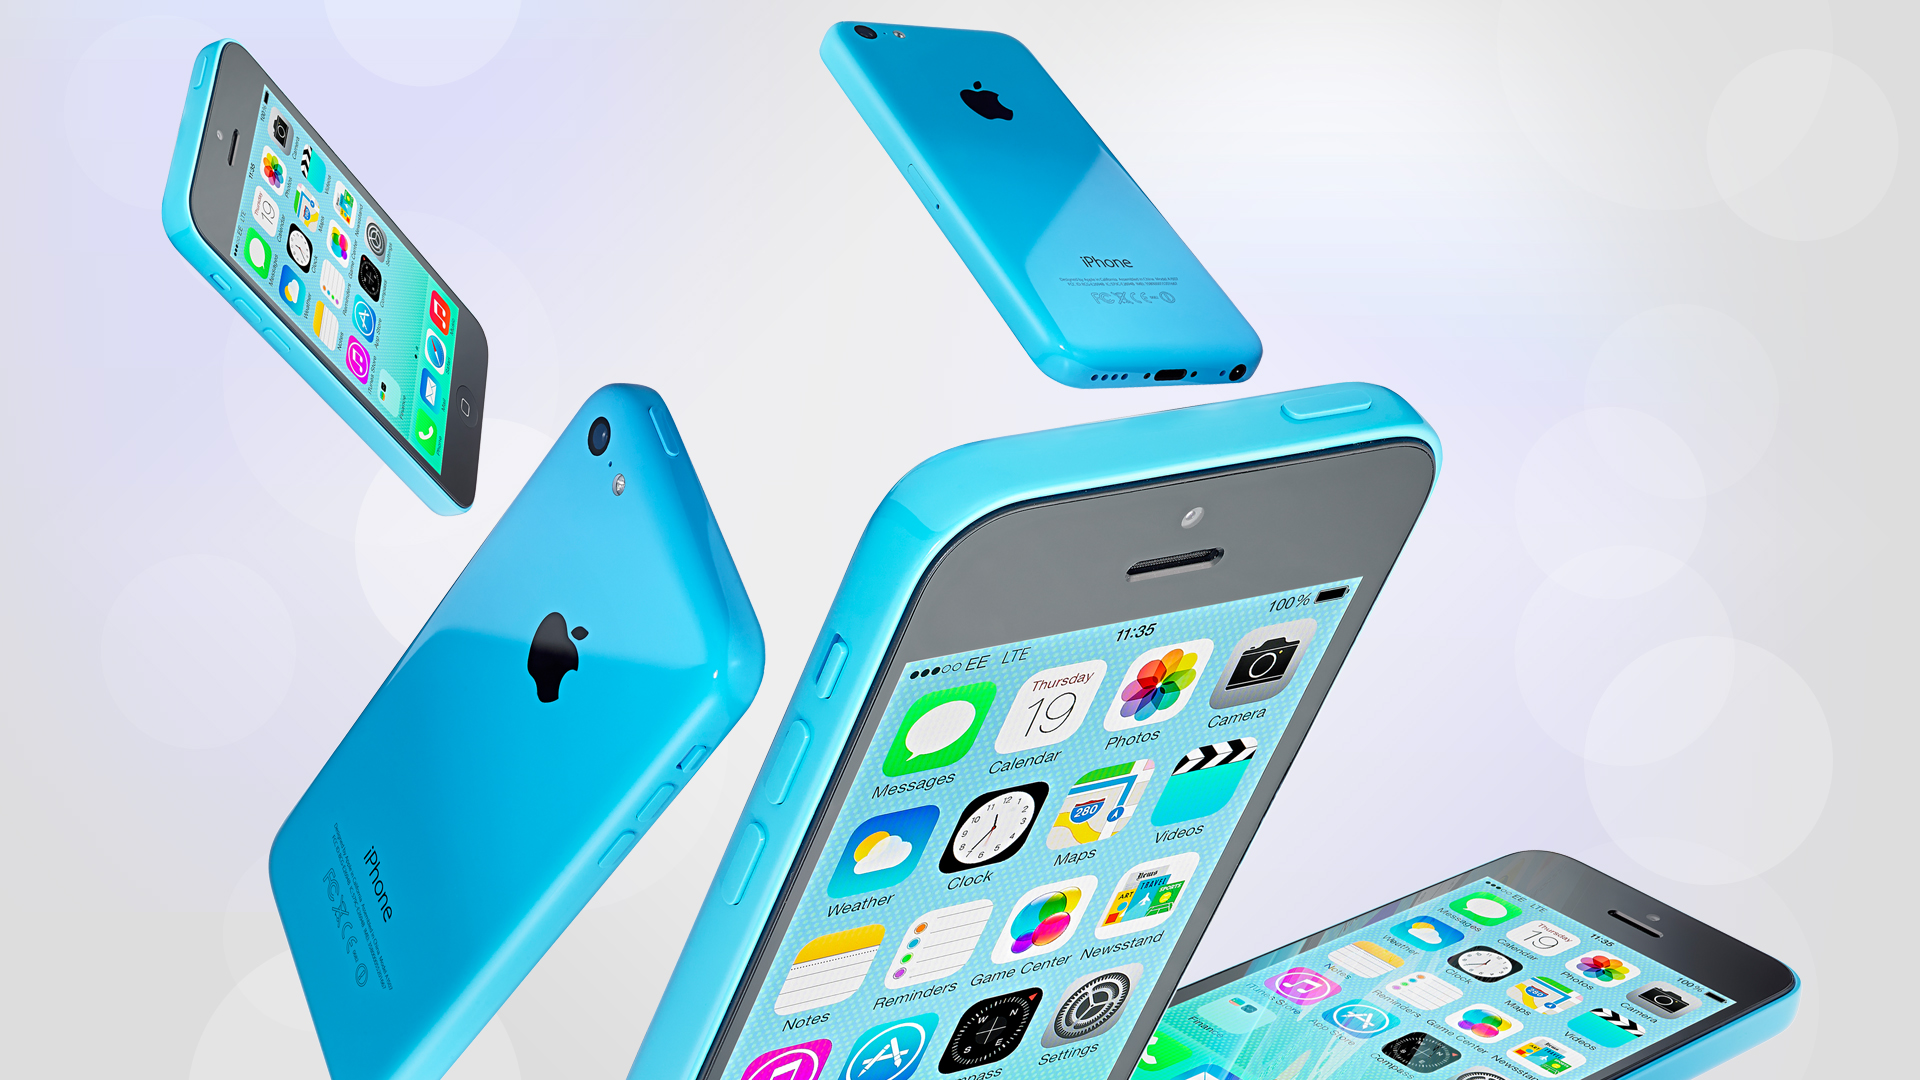 iPhone 5c is now considered a 'vintage' device with limited